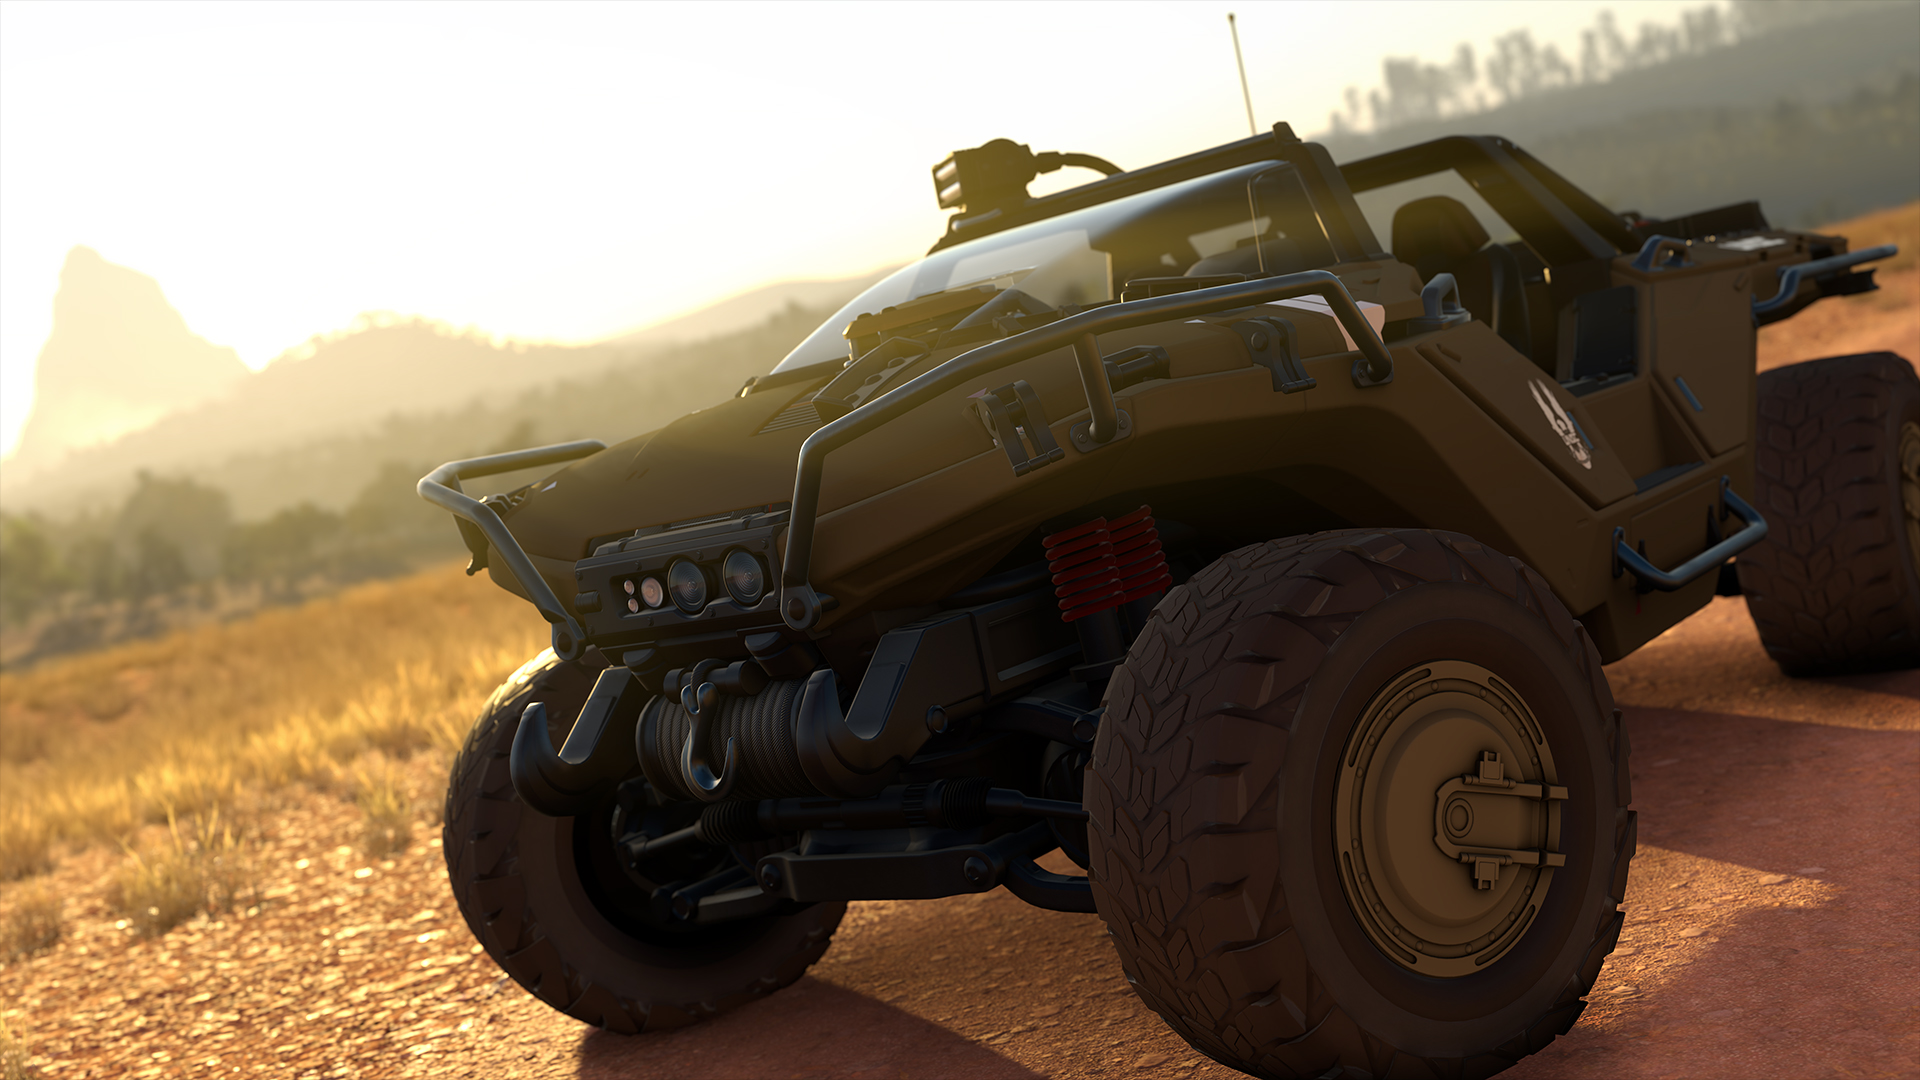 The Halo Warthog will feature in Forza Horizon 3 as a free download - Team  VVV